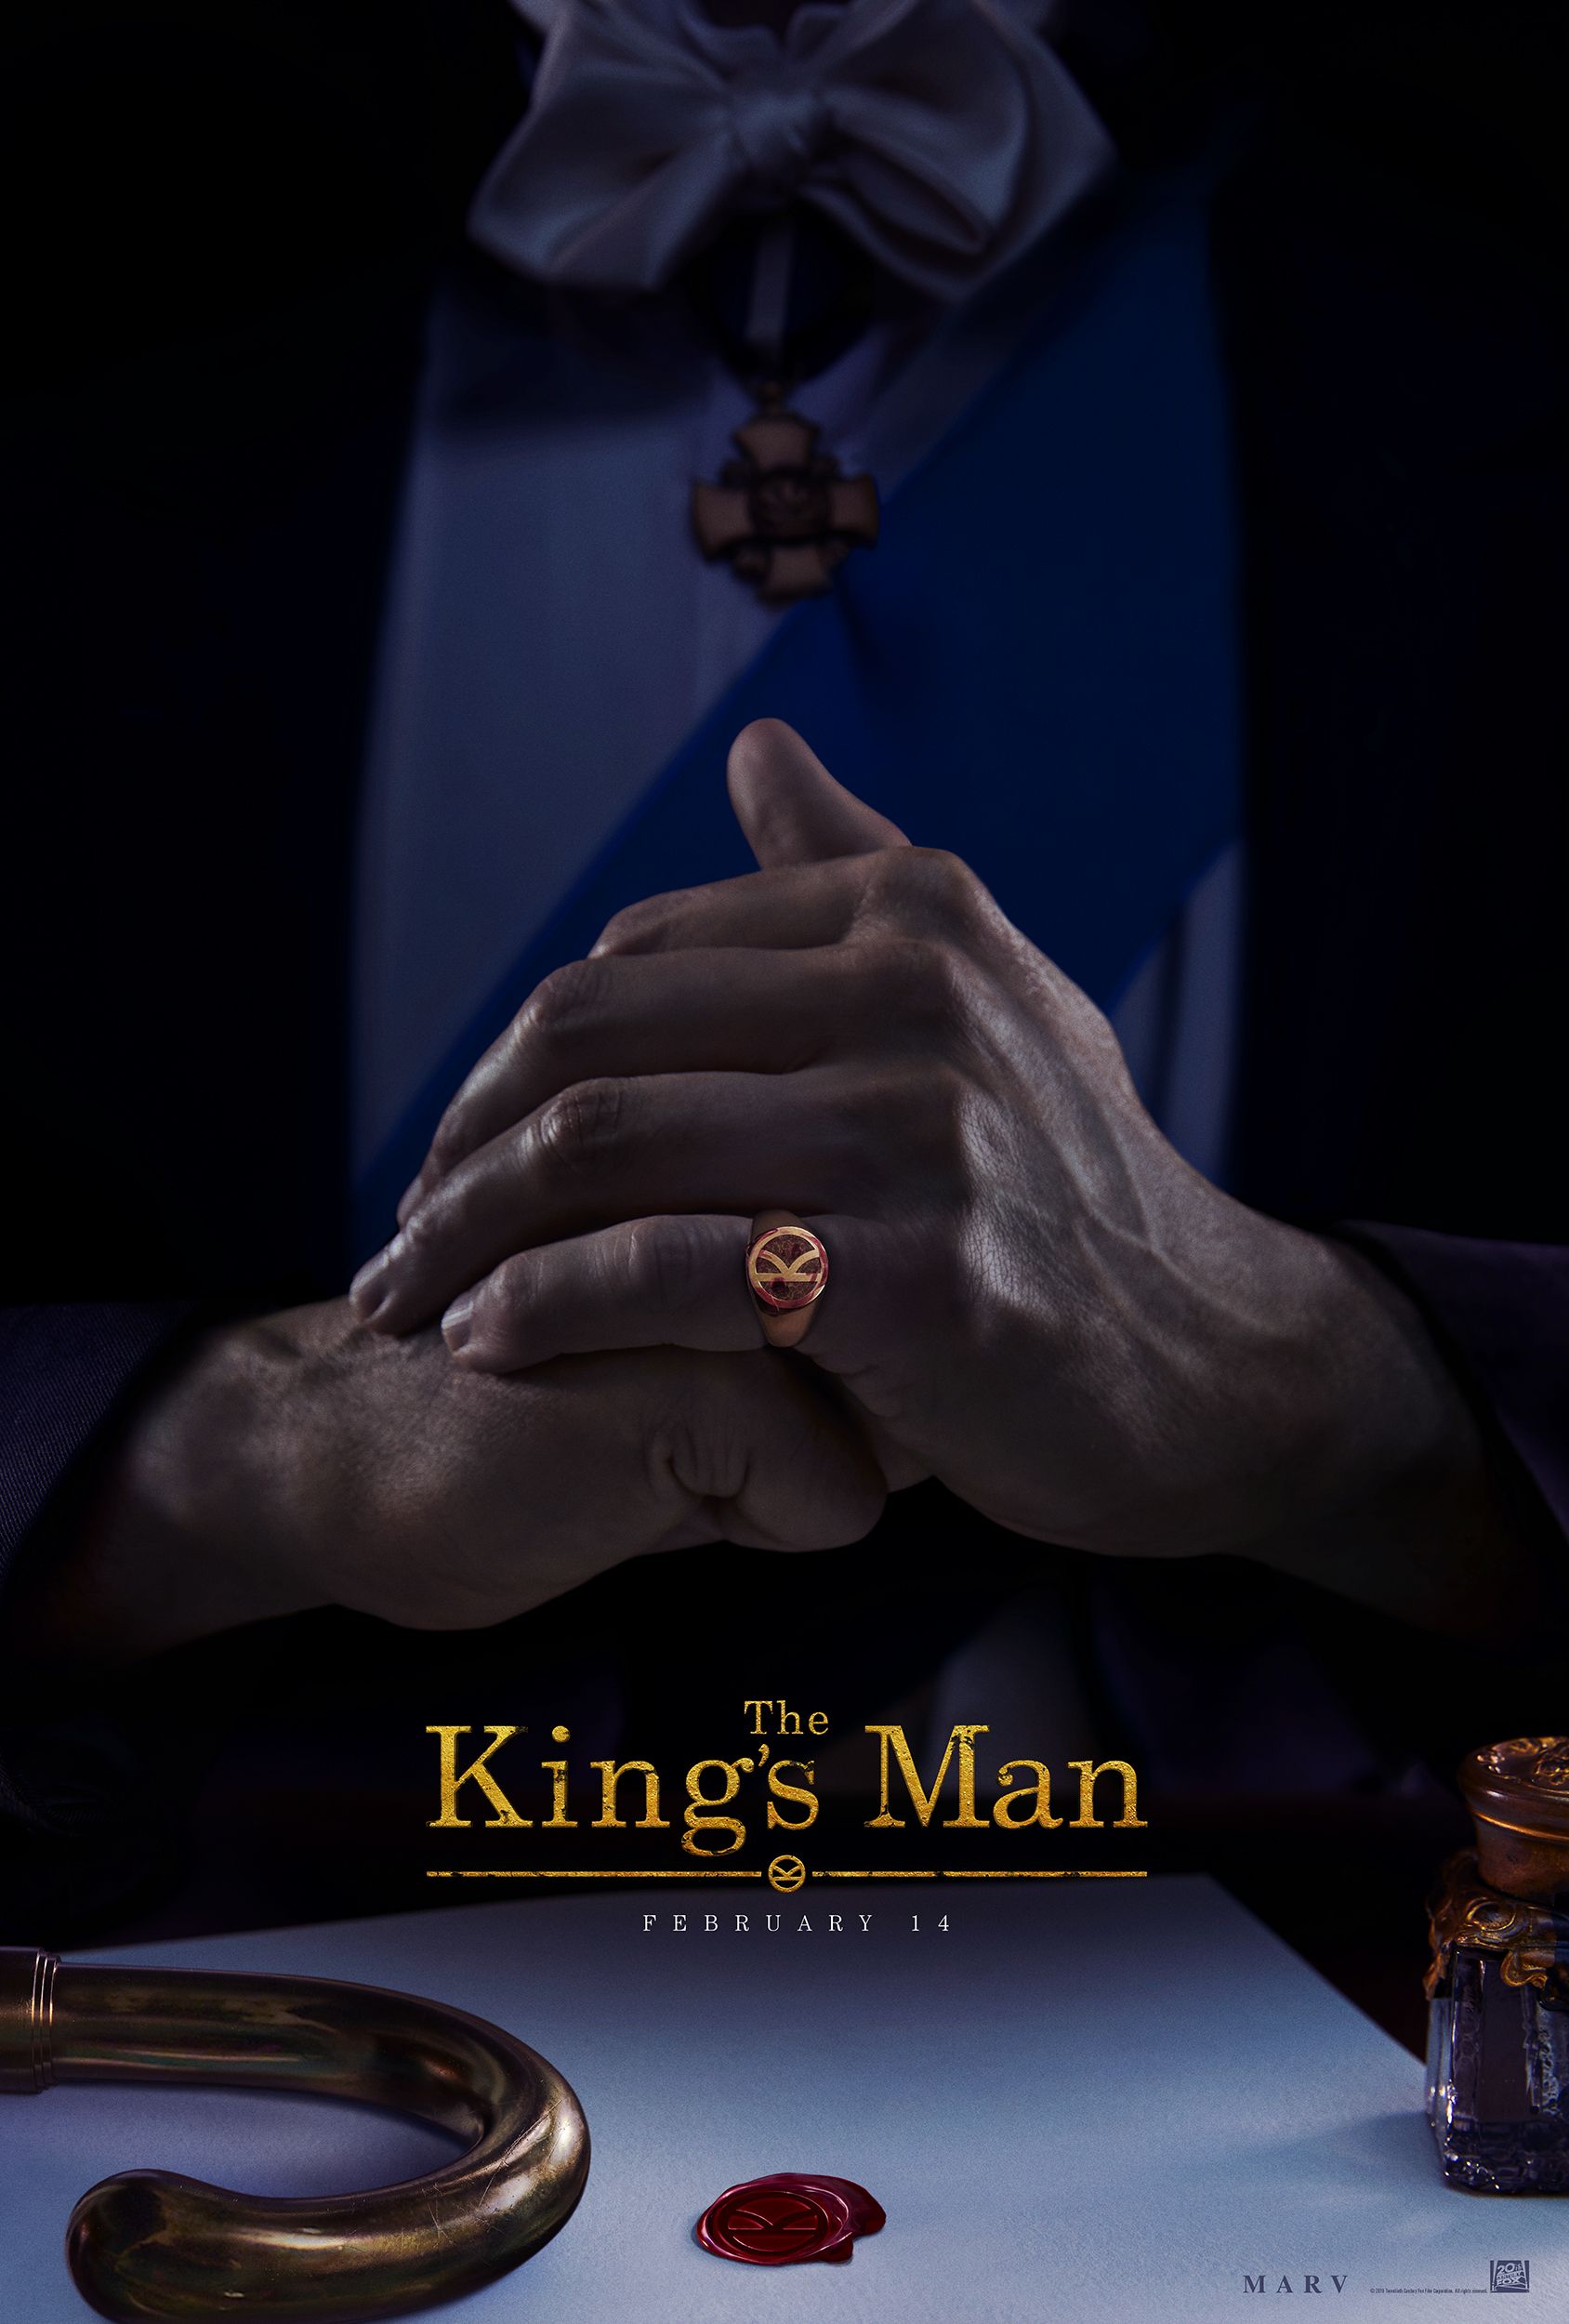 Kingsman Prequel Trailer and Poster Reveal WWI-Set The King's Man | Collider